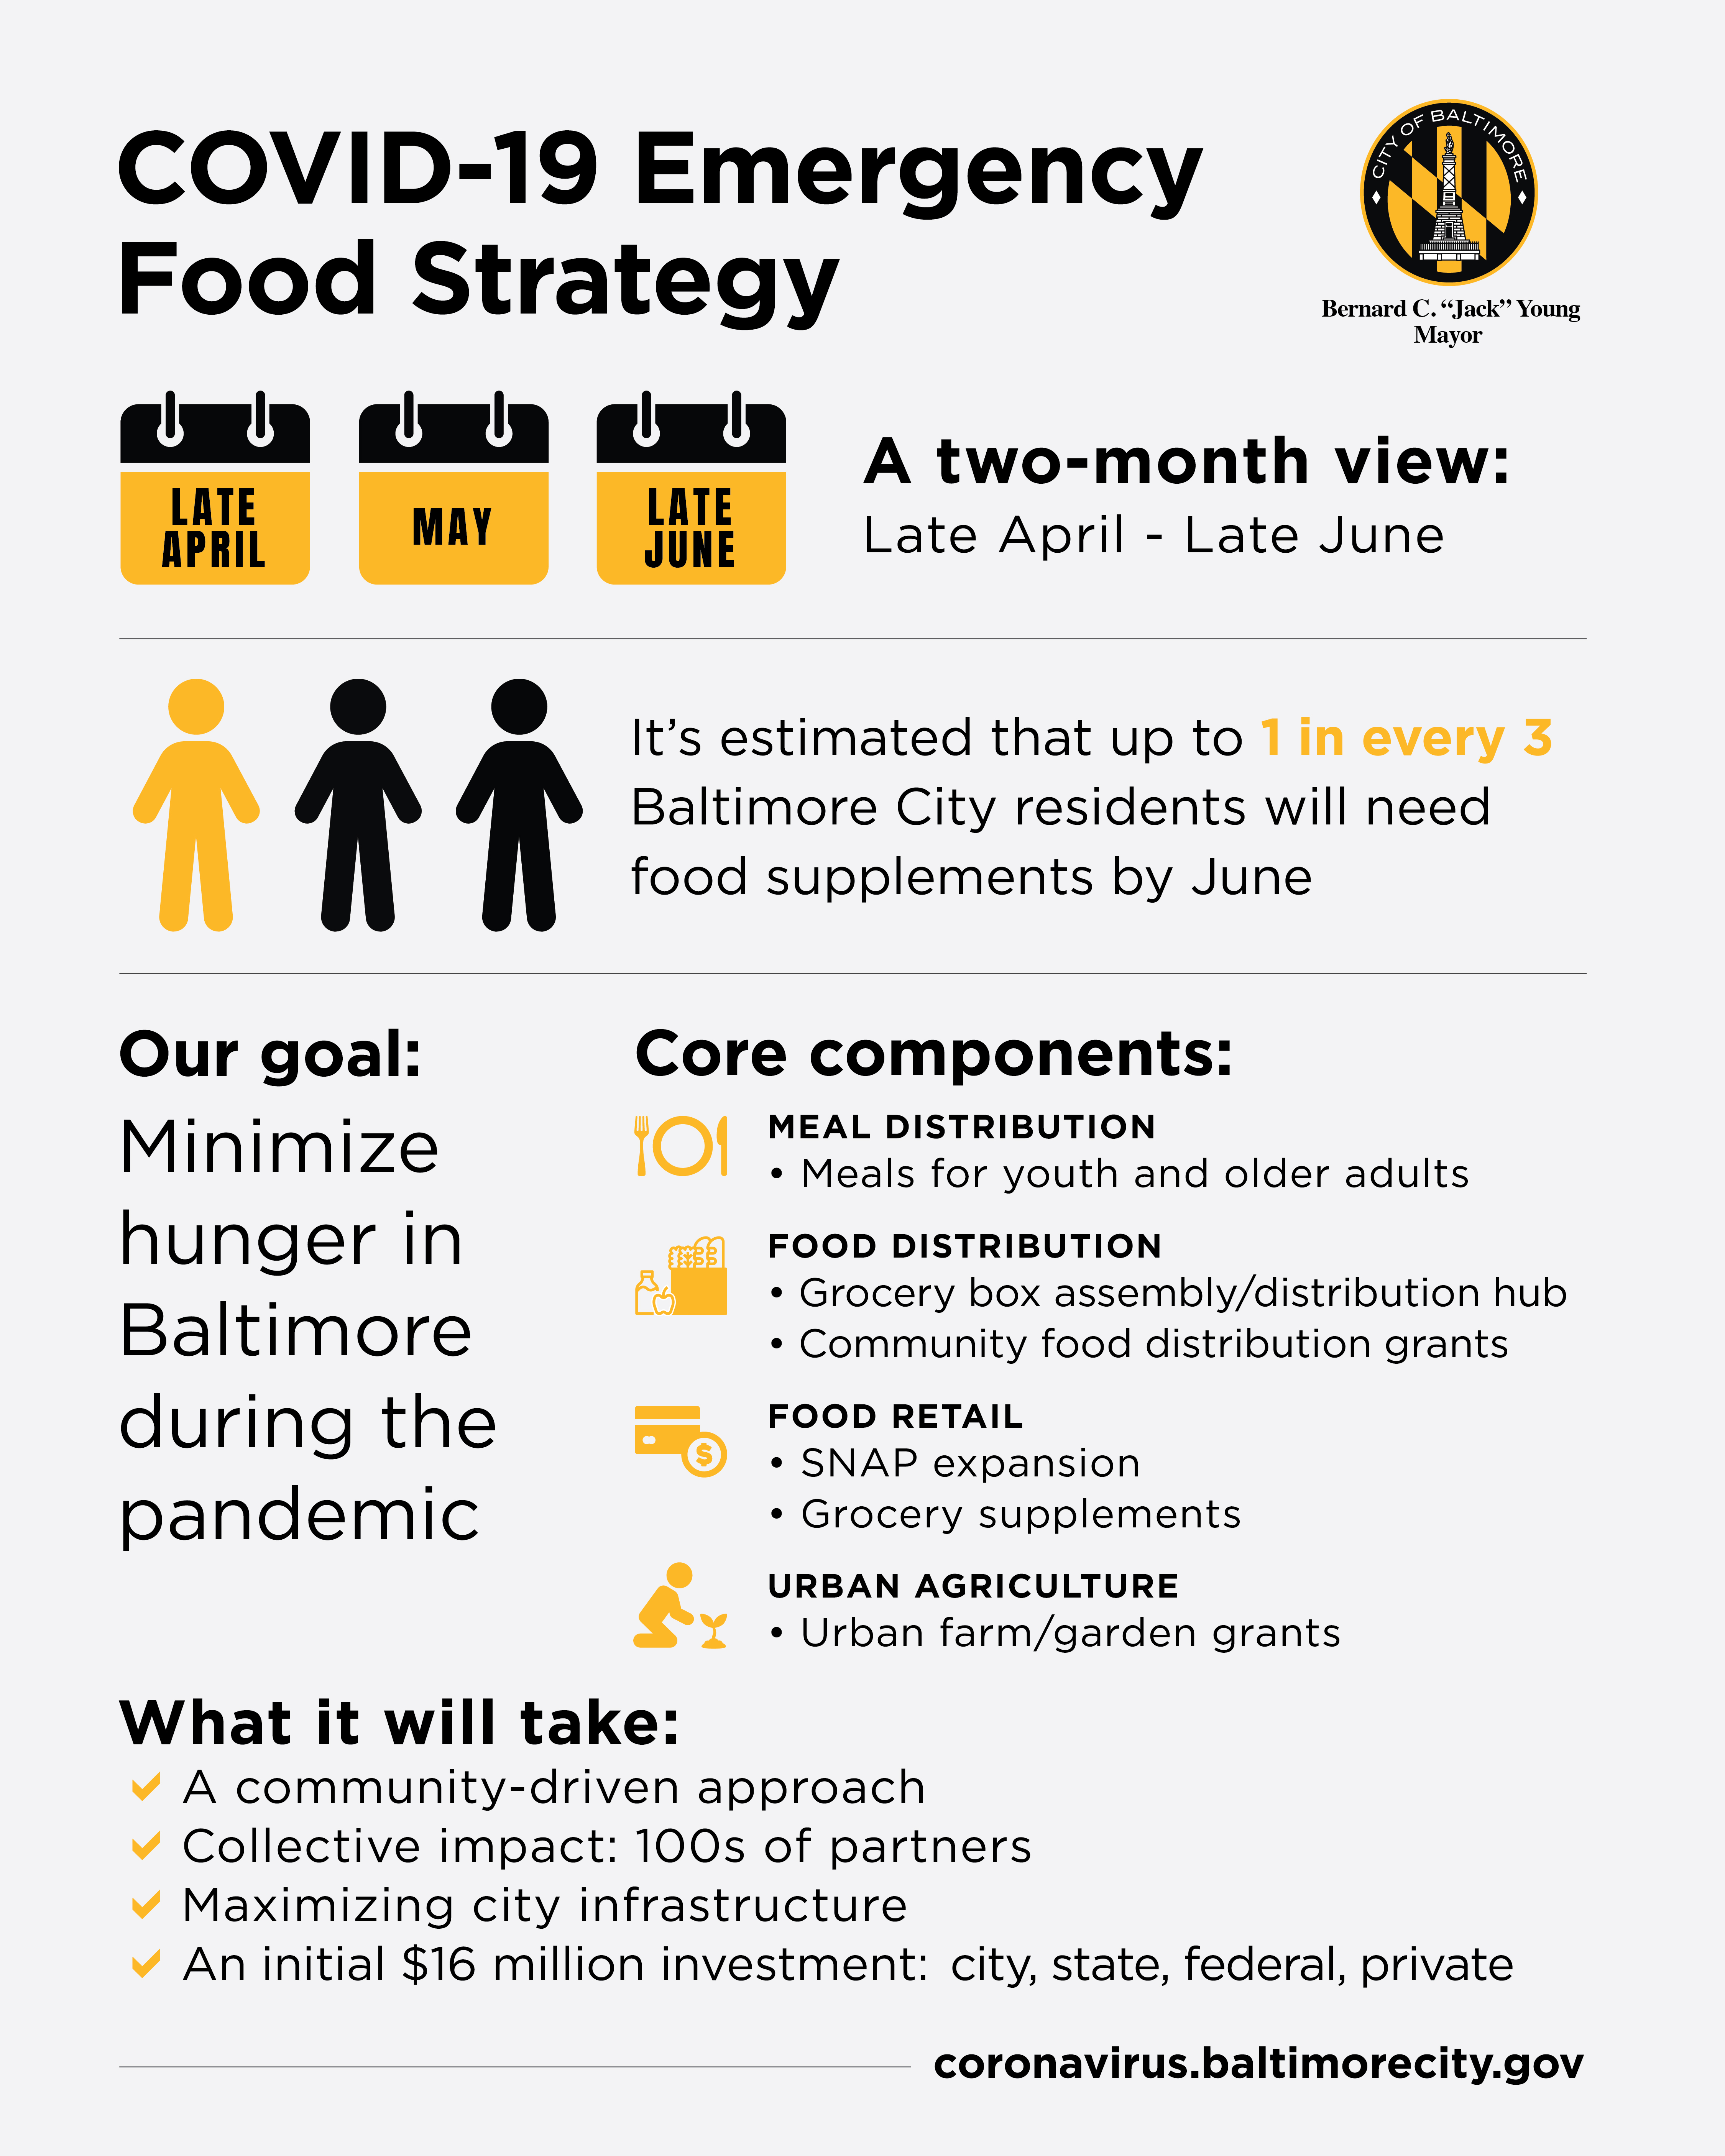 Is estimated that up to 1 out of 3 Baltimore city residents will need food assistance in June. 